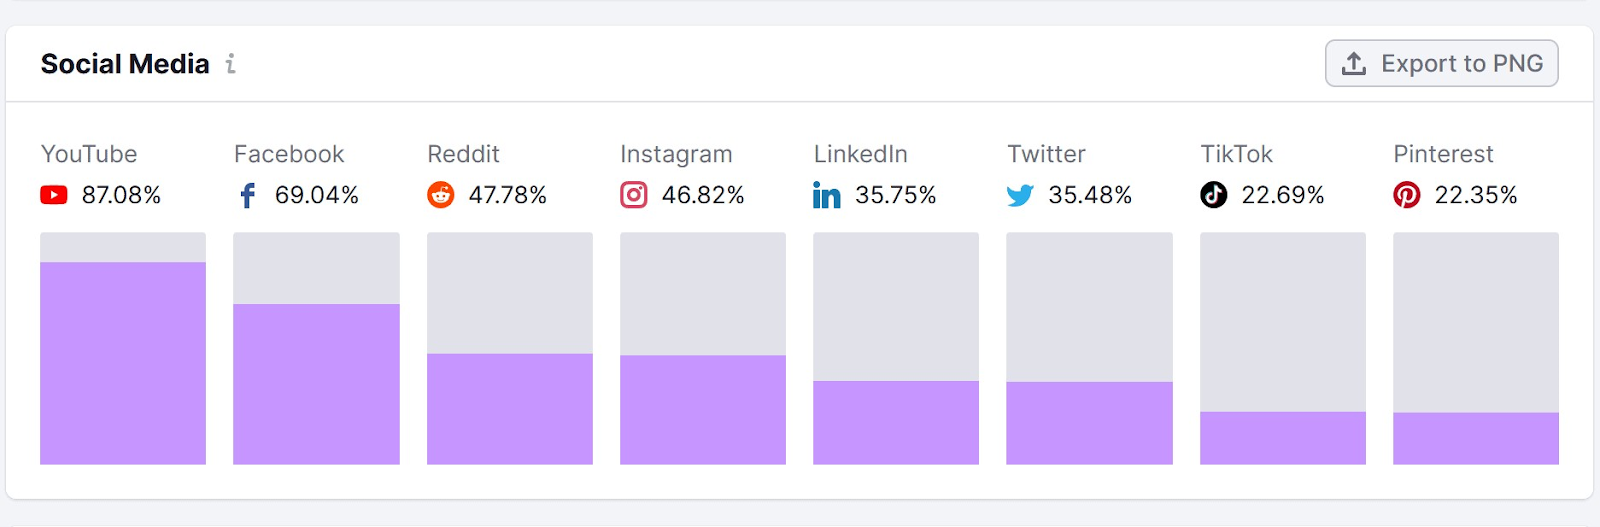 "Social Media" charts from the "Audience" report in Market Explorer